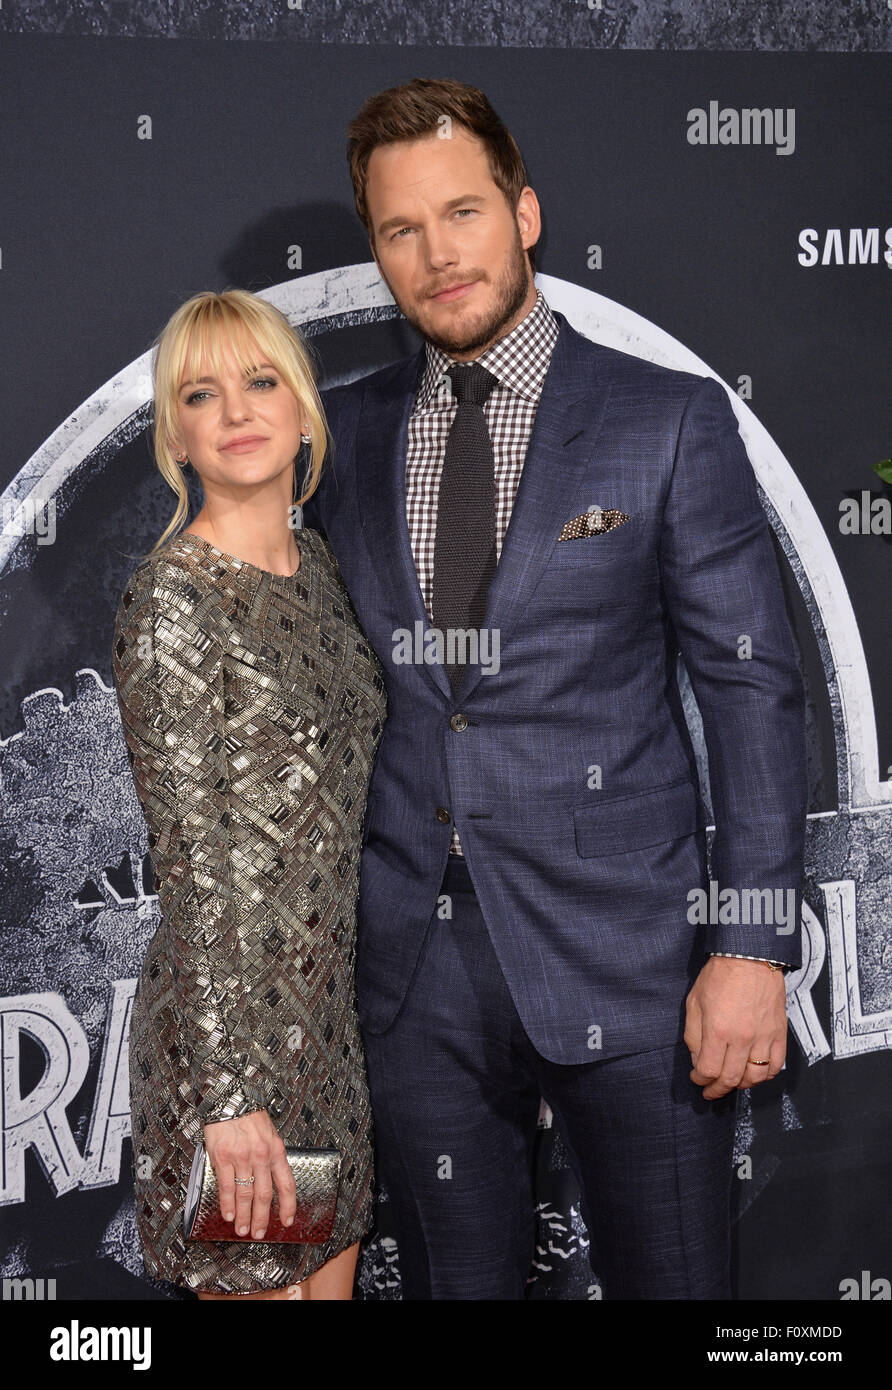 LOS ANGELES, CA - JUNE 10, 2015: Chris Pratt & wife Anna Faris at the world premiere of his movie 'Jurassic World' at the Dolby Theatre, Hollywood. Stock Photo